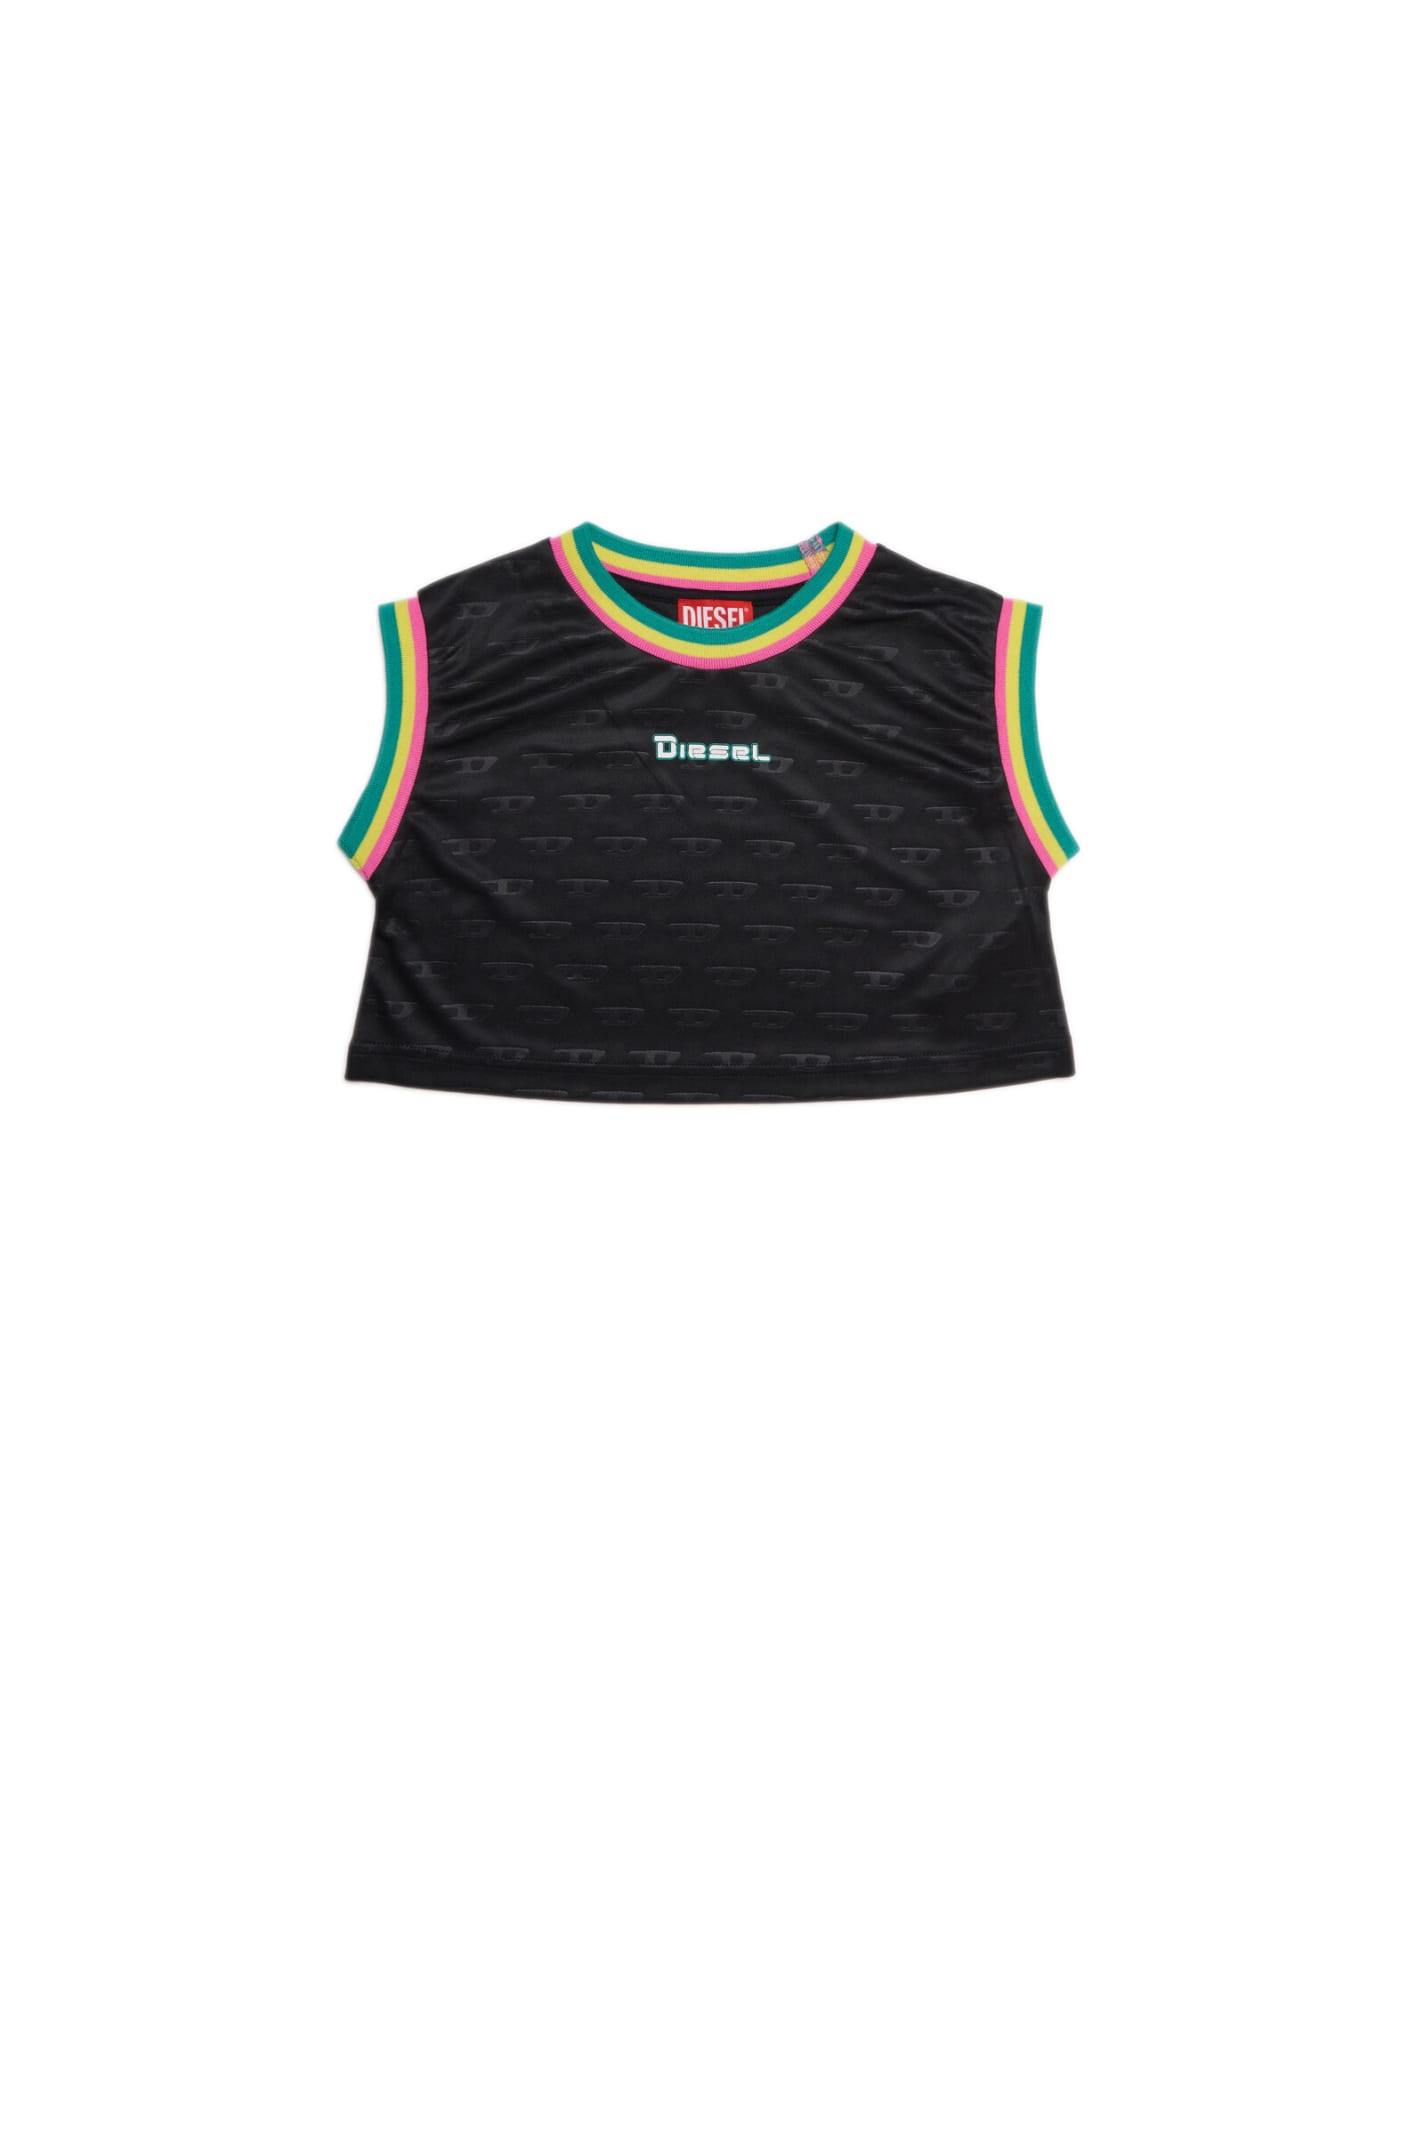 DIESEL TRISNY T-SHIRT DIESEL BLACK CROPPED BASKETBALL TANK TOP WITH ALLOVER LOGO